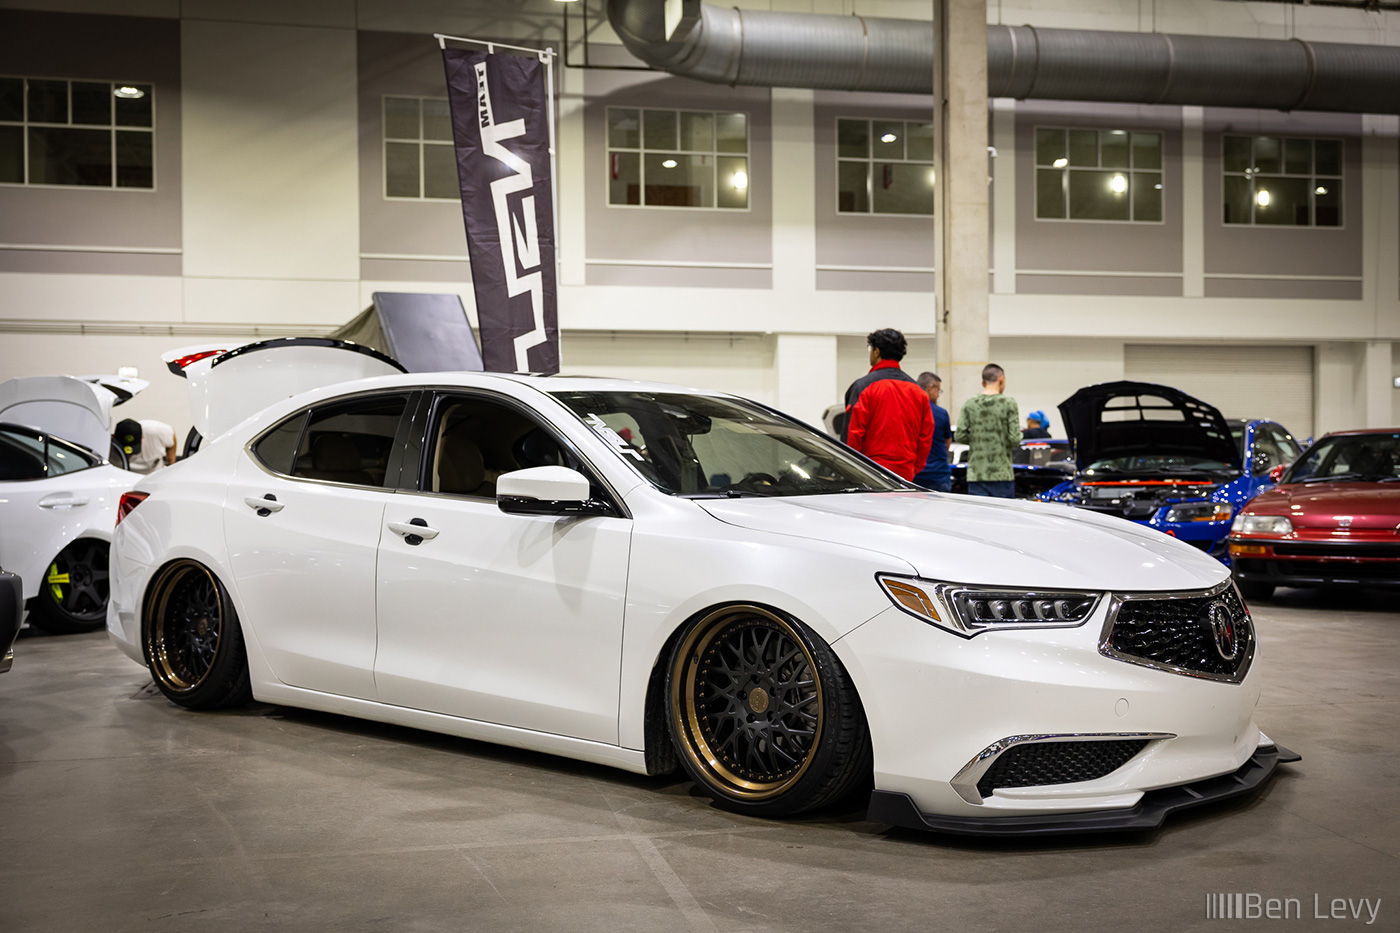 White Acura TLX at Wekfest Chicago